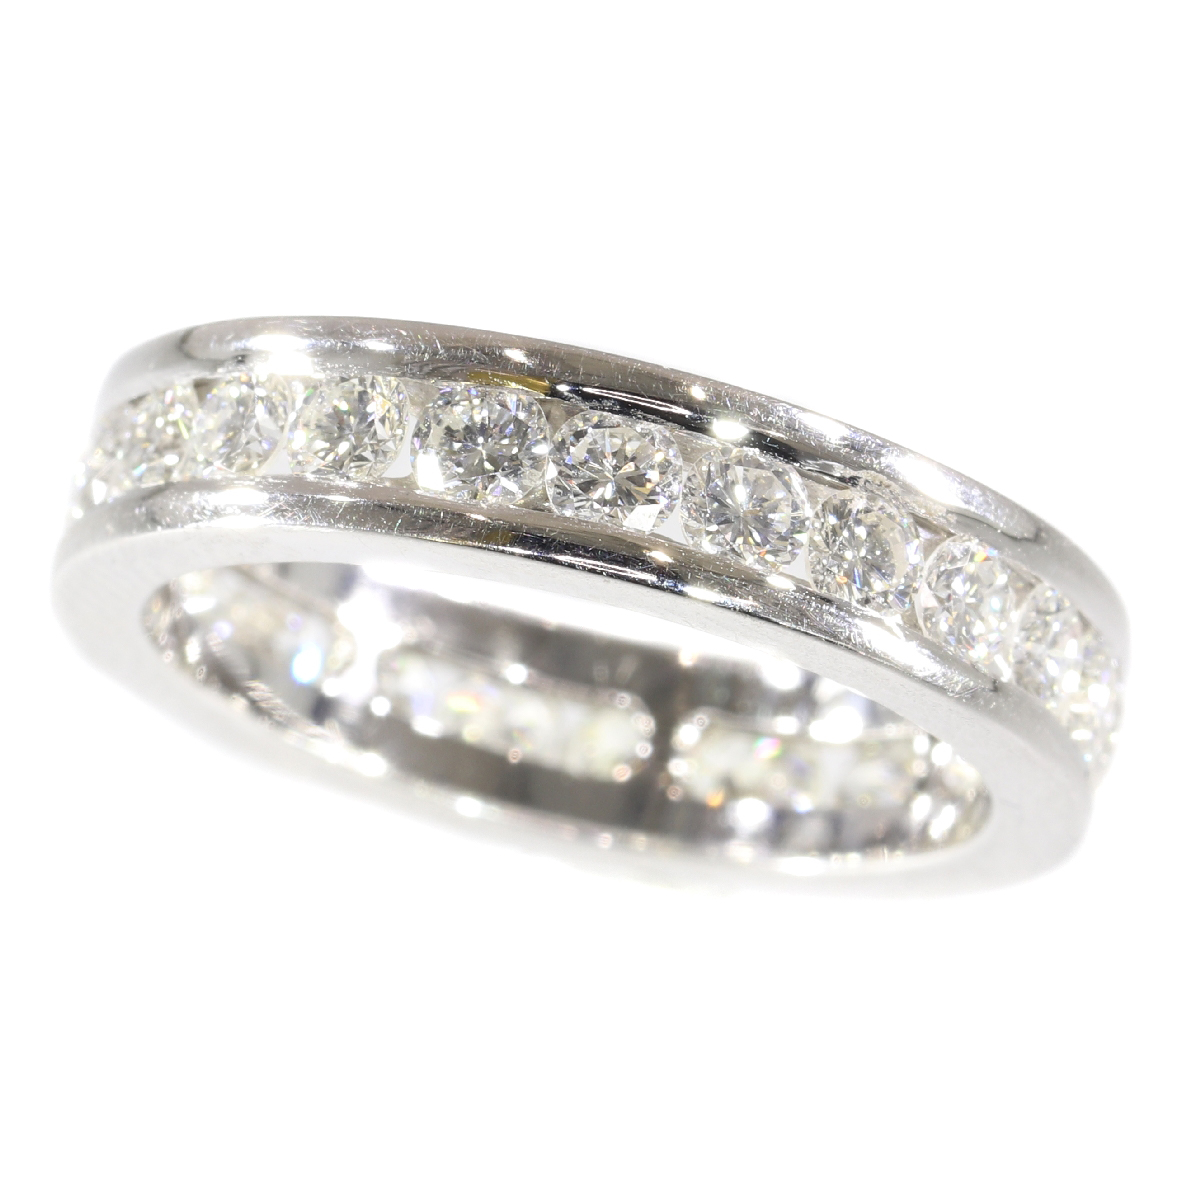 White gold estate eternity band or a so-called alliance ring set with ...